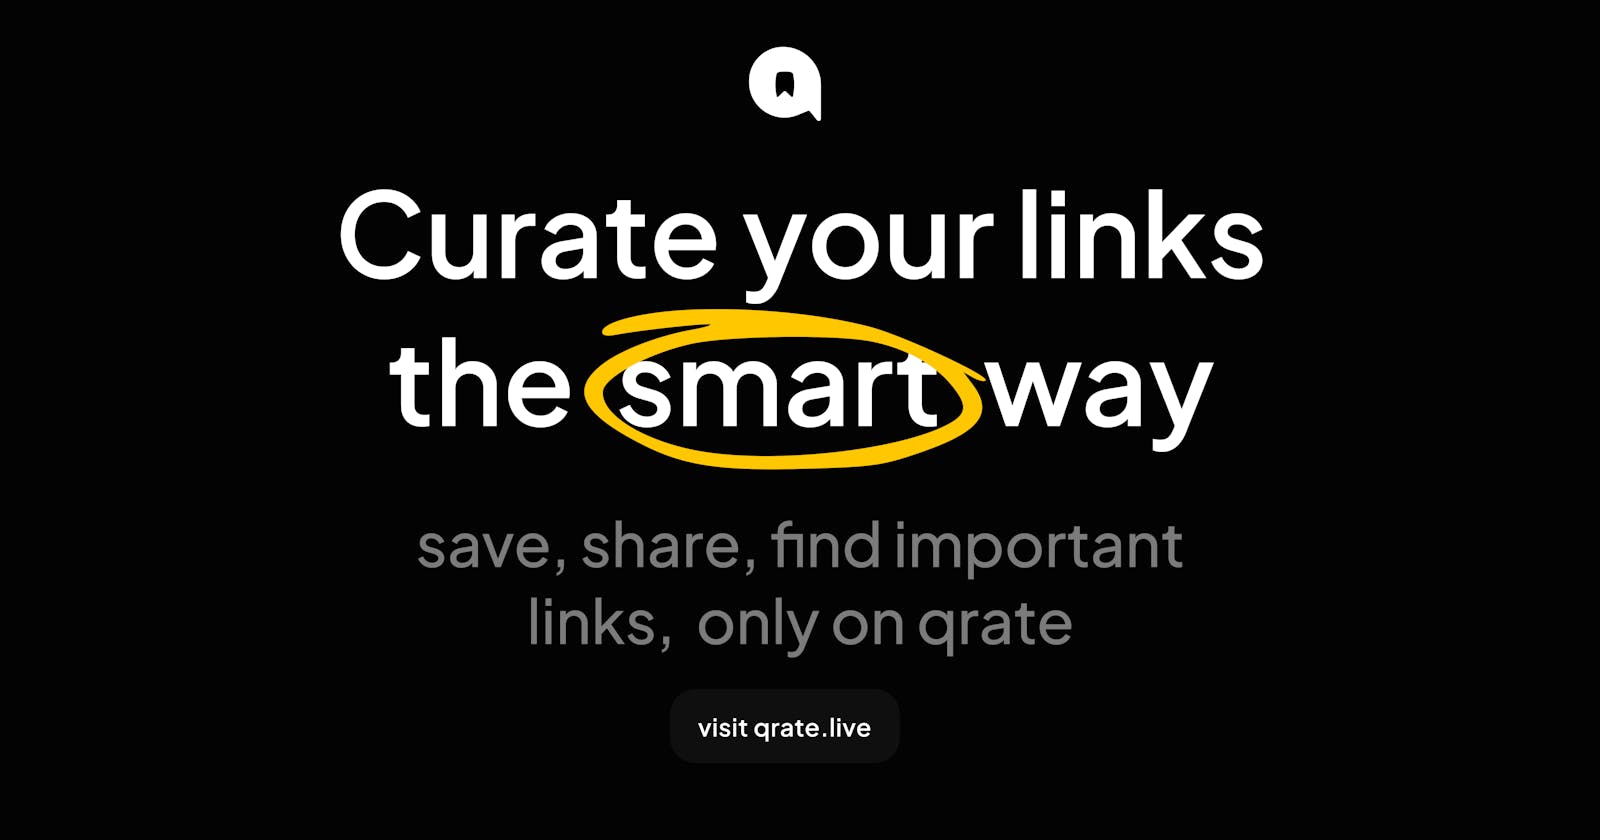 Introducing qrate - A smart tool to curate your links the smart way.